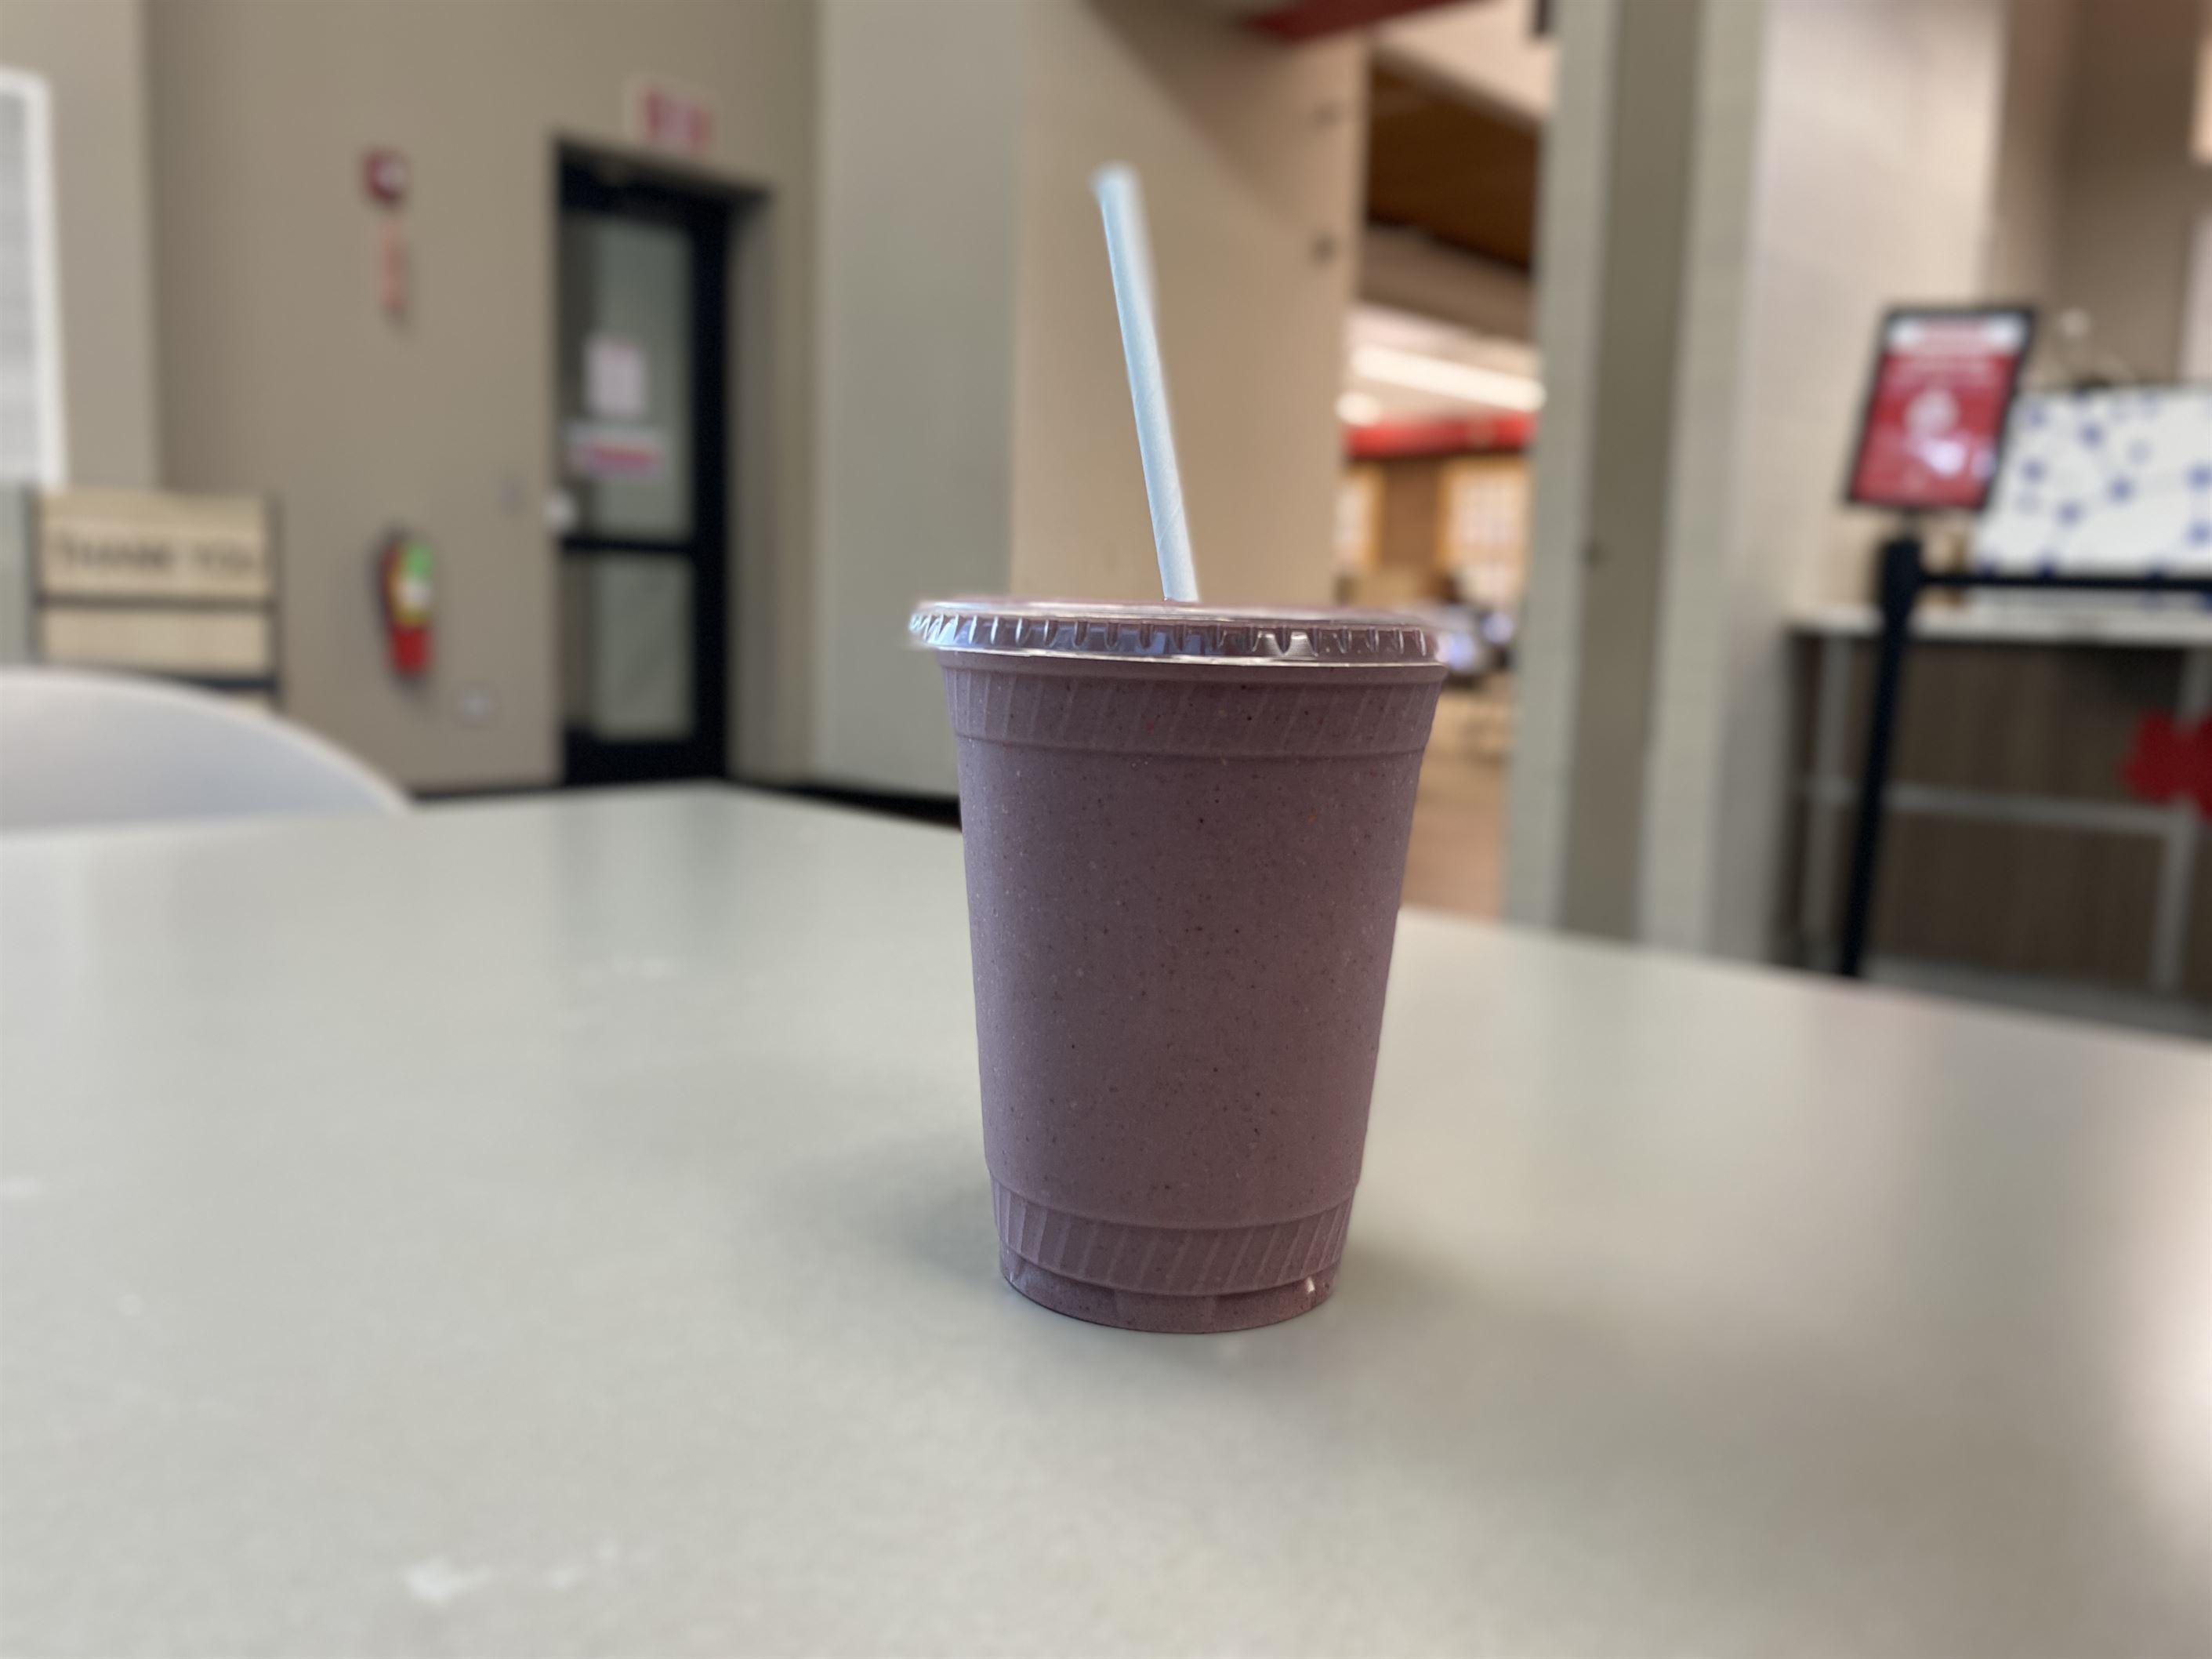 The Reactor Smoothie from Smoothie Lab, with acai, blackberries, bananas, rice milk and honey. Sal DiMaggio | The Montclarion